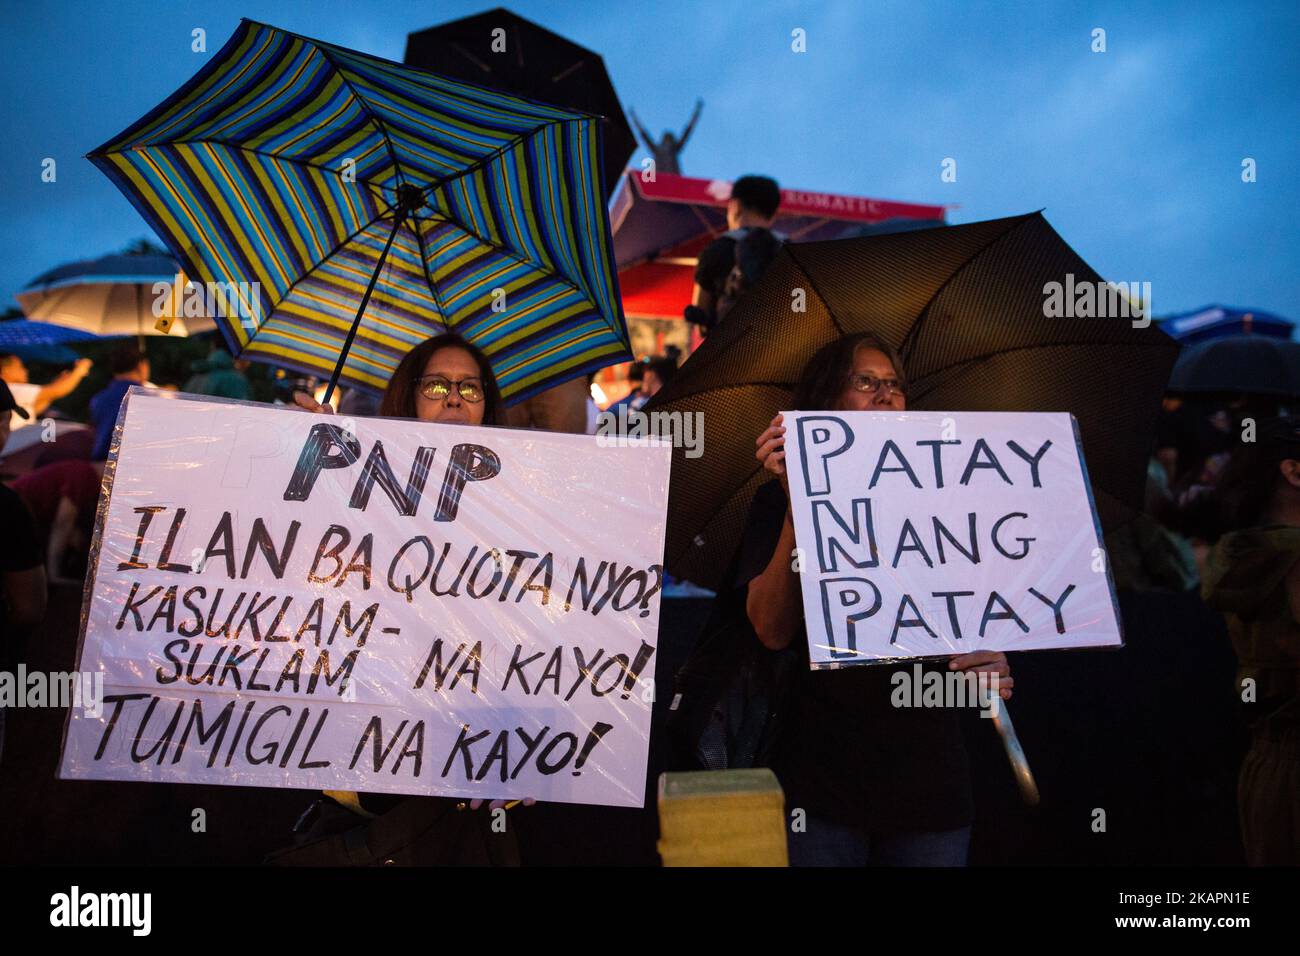 Protesters hold placards and slogans during a rally against extrajudicial killings in EDSA Shrine, Ortigas, Pasig City, Philippines on Monday, 21 August 2017. The death of Kian Delos Santos, who was killed by policemen in an alleged shootout, has sparked outrage among citizens related to the government's Philippine anti-drug operation. (Photo by Richard Atrero de Guzman/NurPhoto) Stock Photo